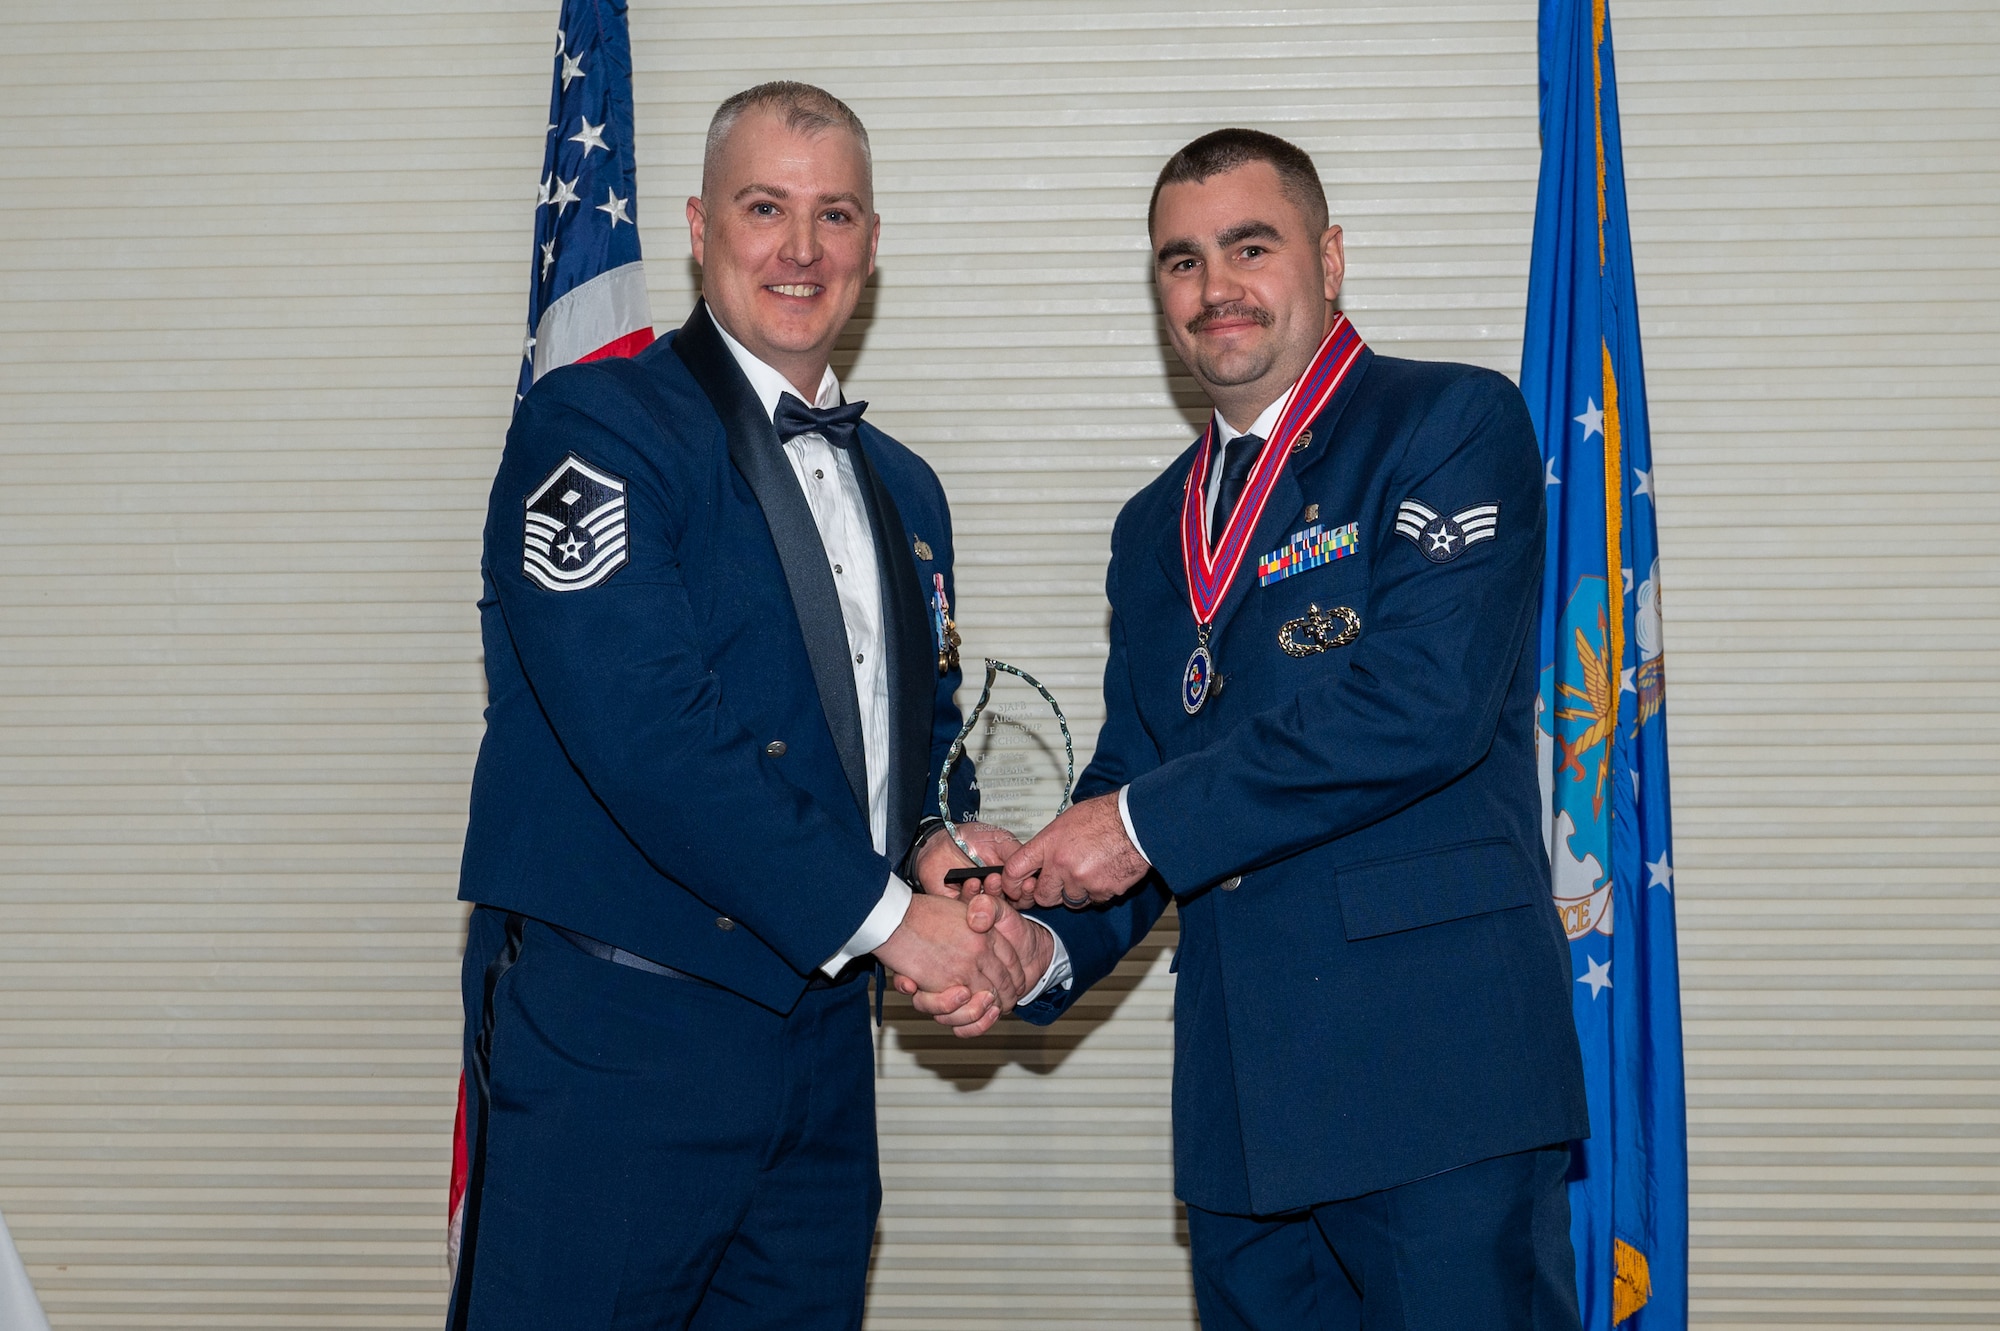 Senior Airman Derrick Shaw, assigned to the 335th Fighter Squadron, right, receives the Academic Achievement Award from Master Sgt. Peter Creighton, 333rd Fighter Generation Squadron first sergeant, during the Airman Leadership School class 24-C graduation ceremony at Seymour Johnson Air Force Base, North Carolina, Mar. 20, 2024. The students presented with the Academic Achievement Award maintained the highest grade point average throughout the ALS course. (U.S. Air Force photo by Airman Rebecca Tierney)